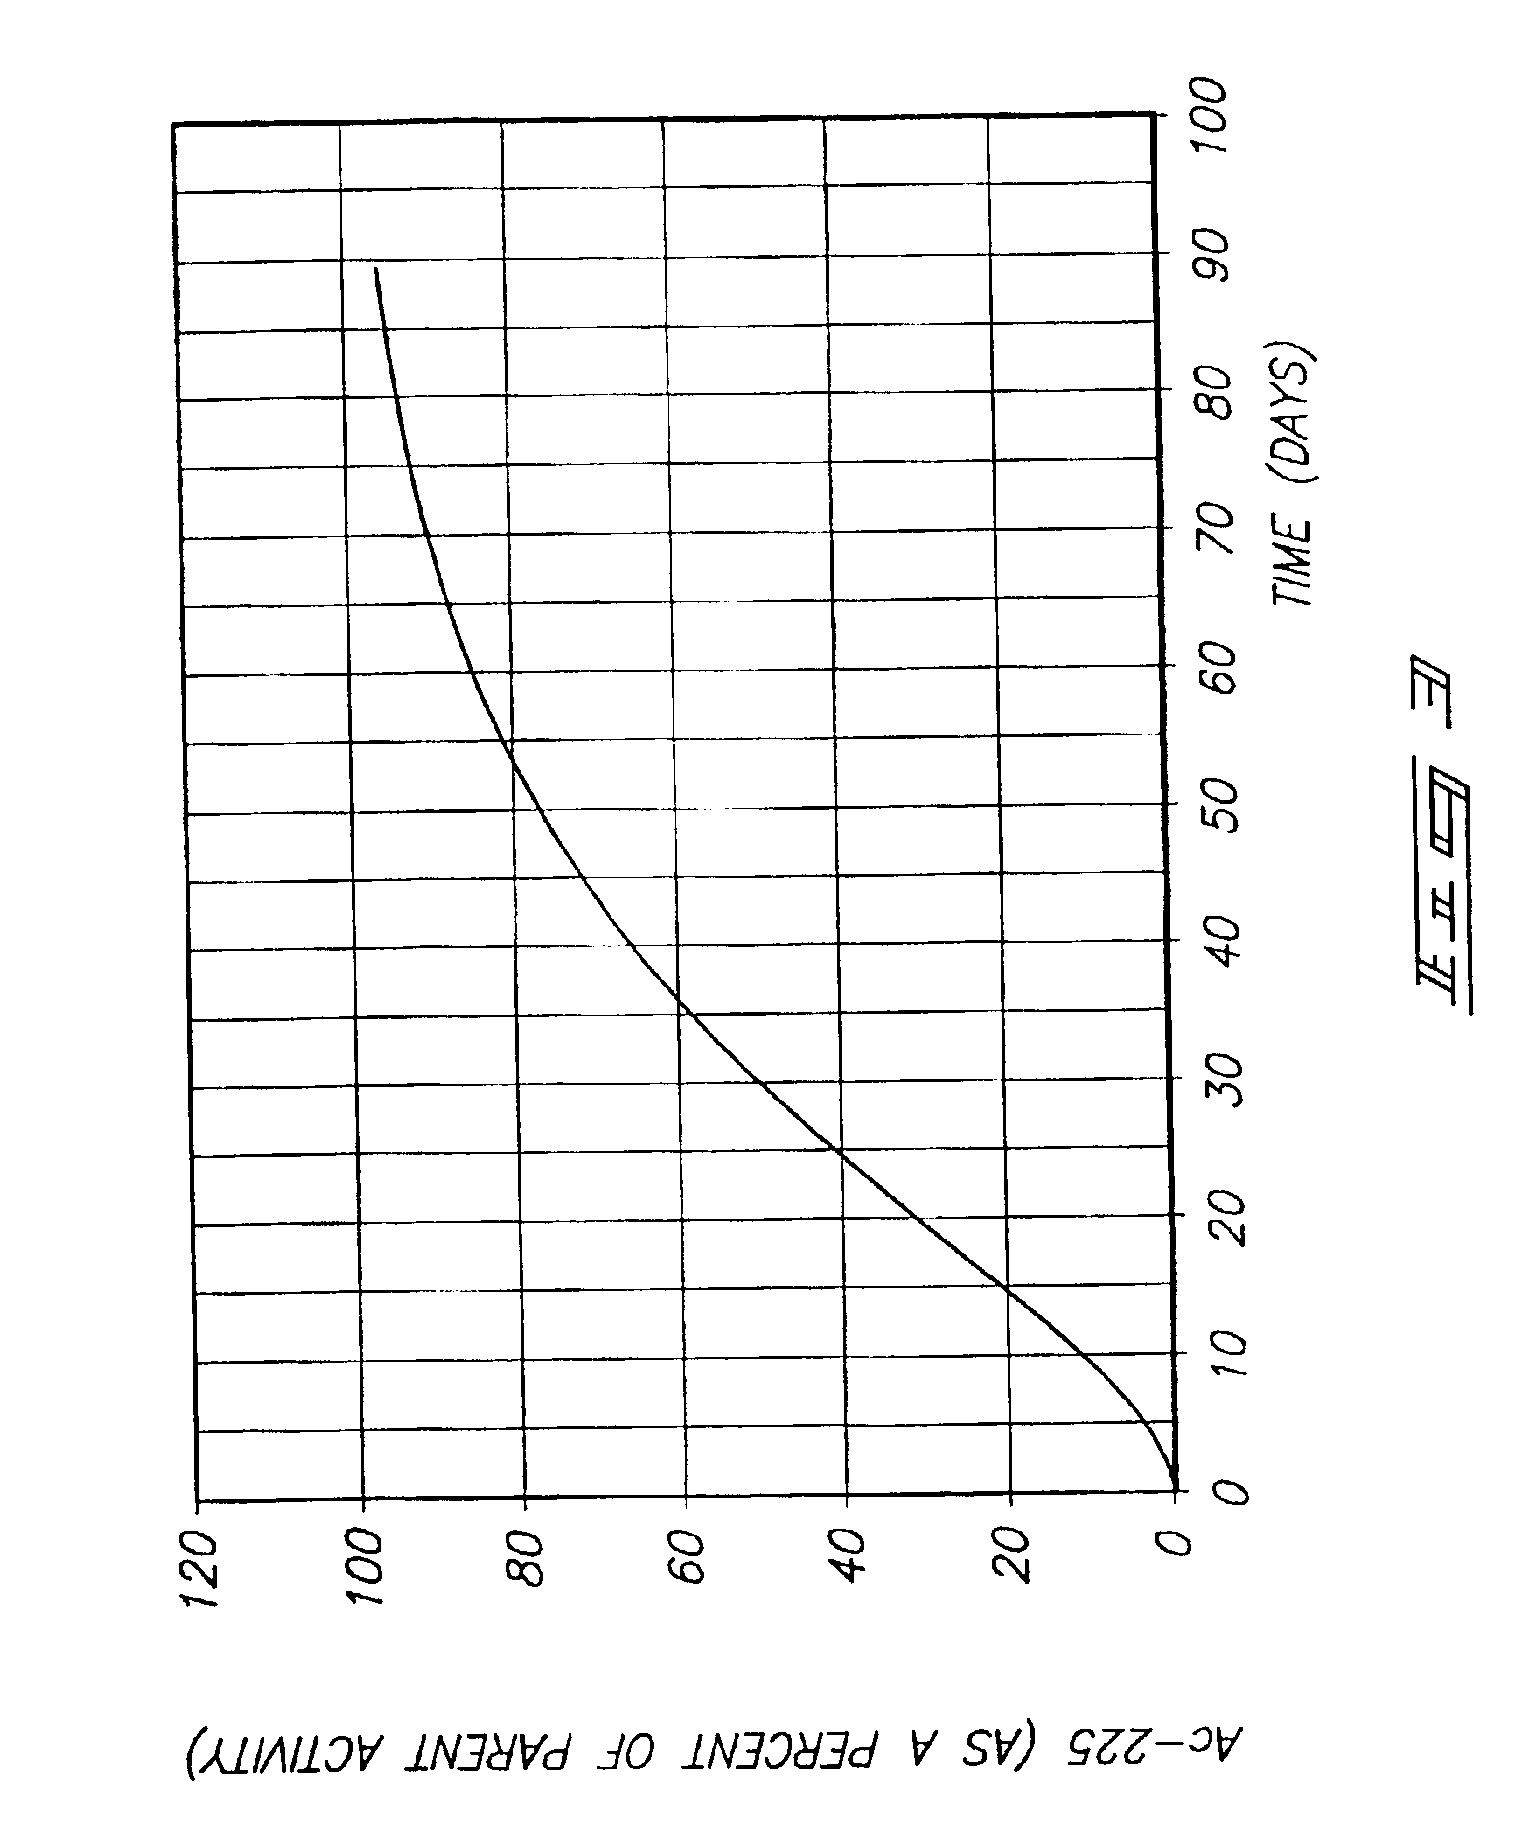 Process for recovery of daughter isotopes from a source material